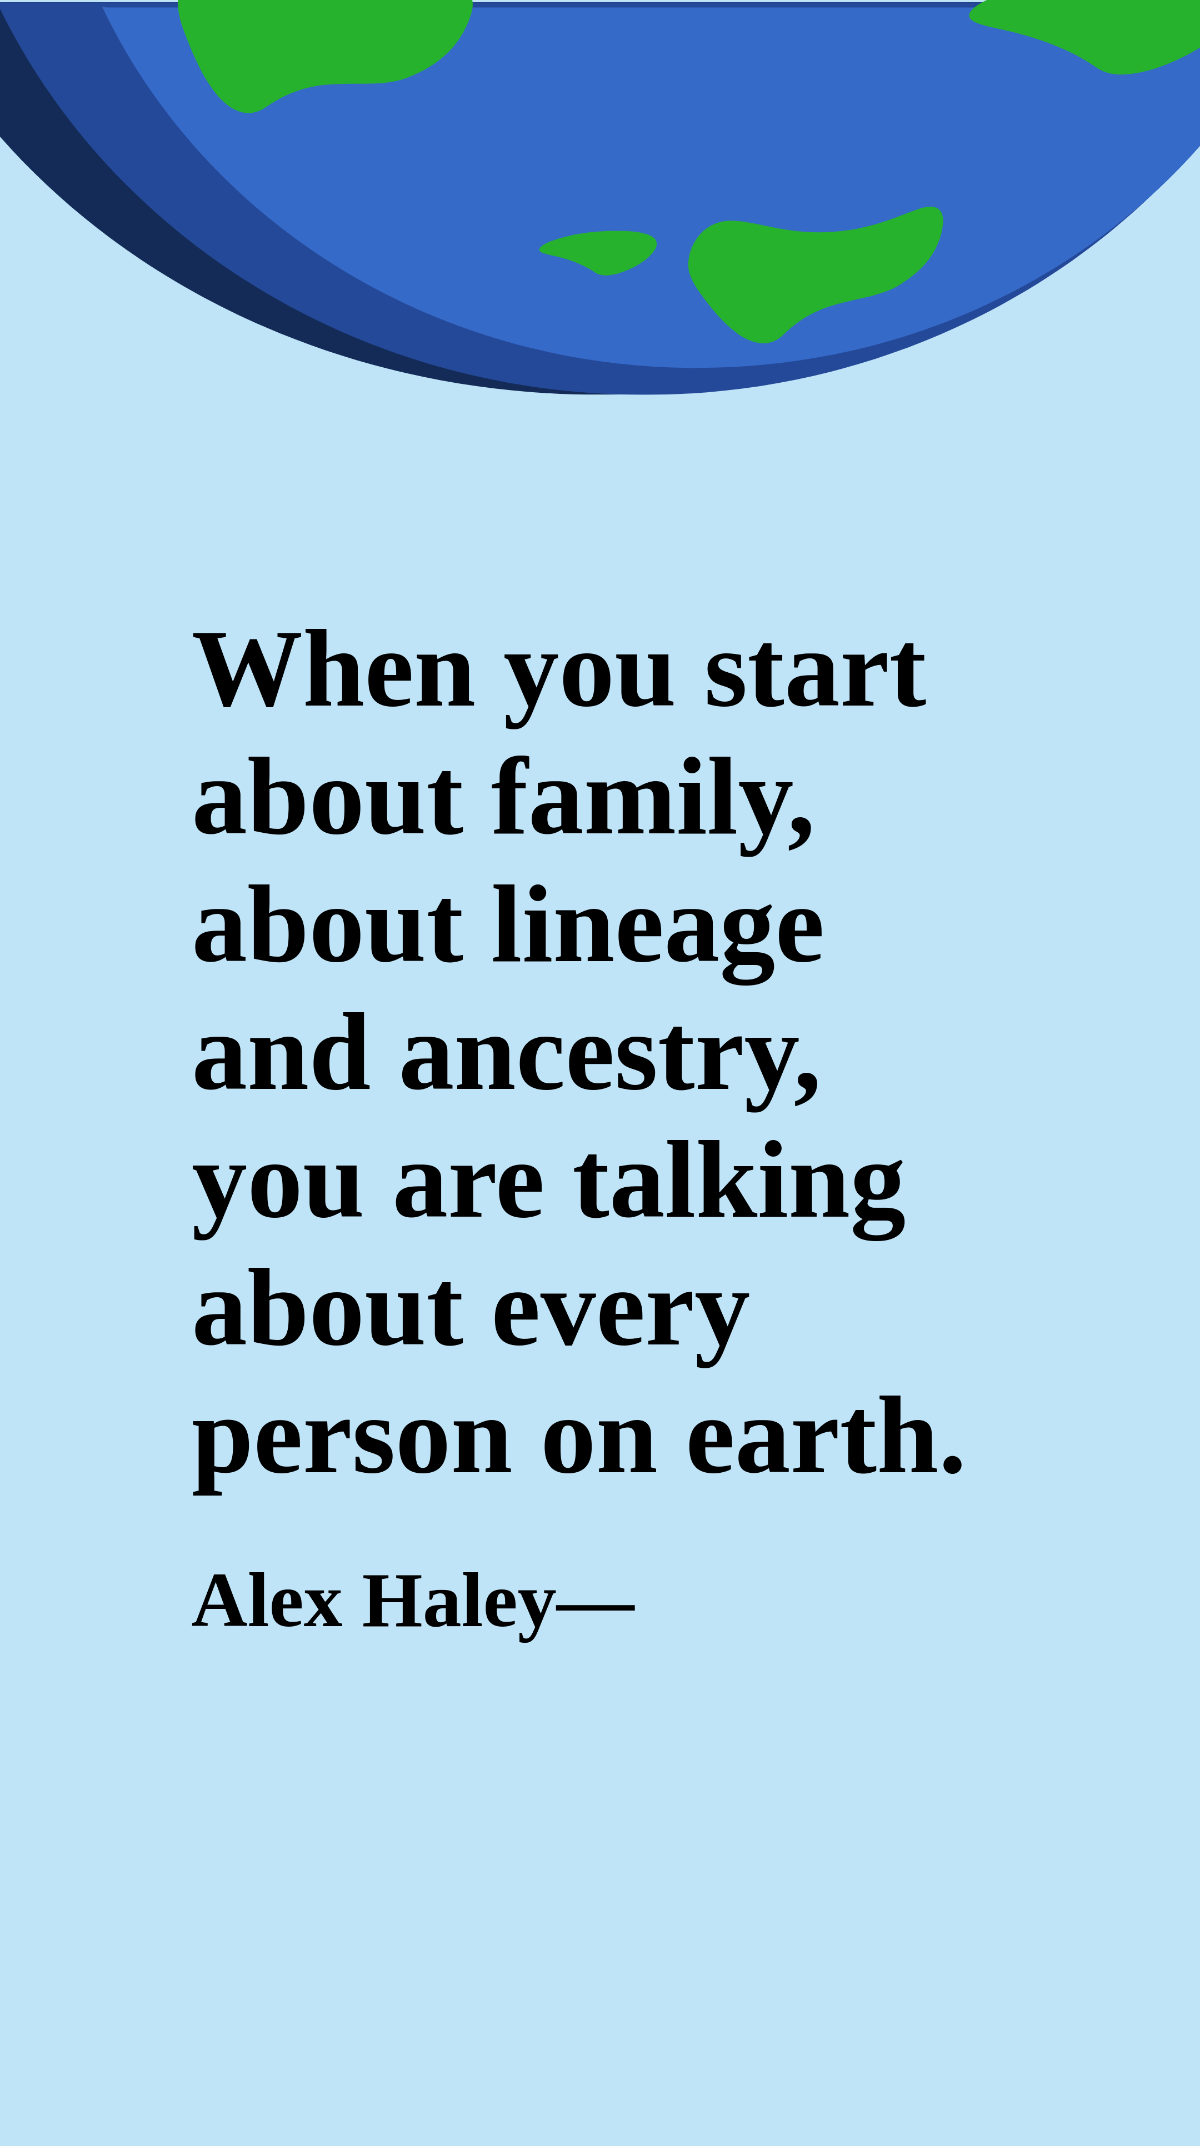 Alex Haley - When you start about family, about lineage and ancestry, you are talking about every person on earth.